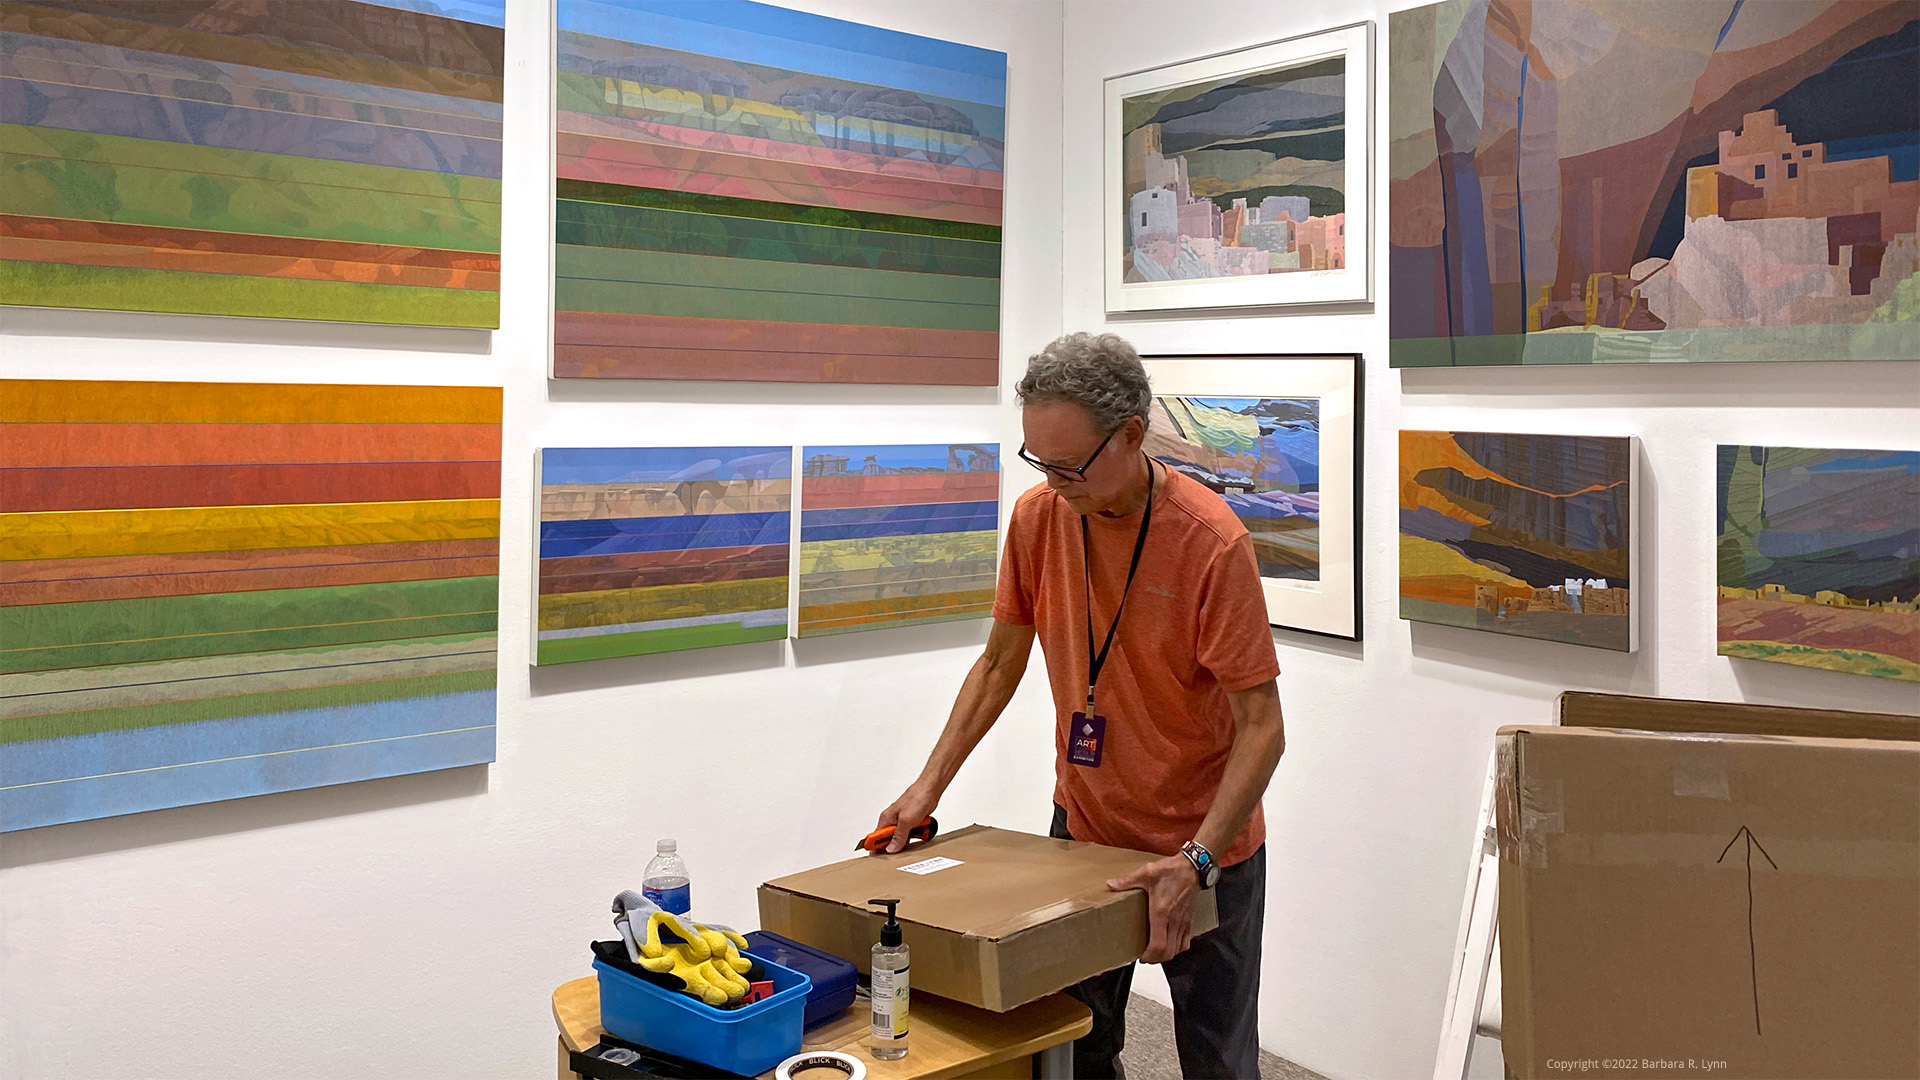 Award of Excellence winner Peter E. Lynn setting up his Exhibitor Space at the Santa Fe Convention Center - Art Santa Fe 2022